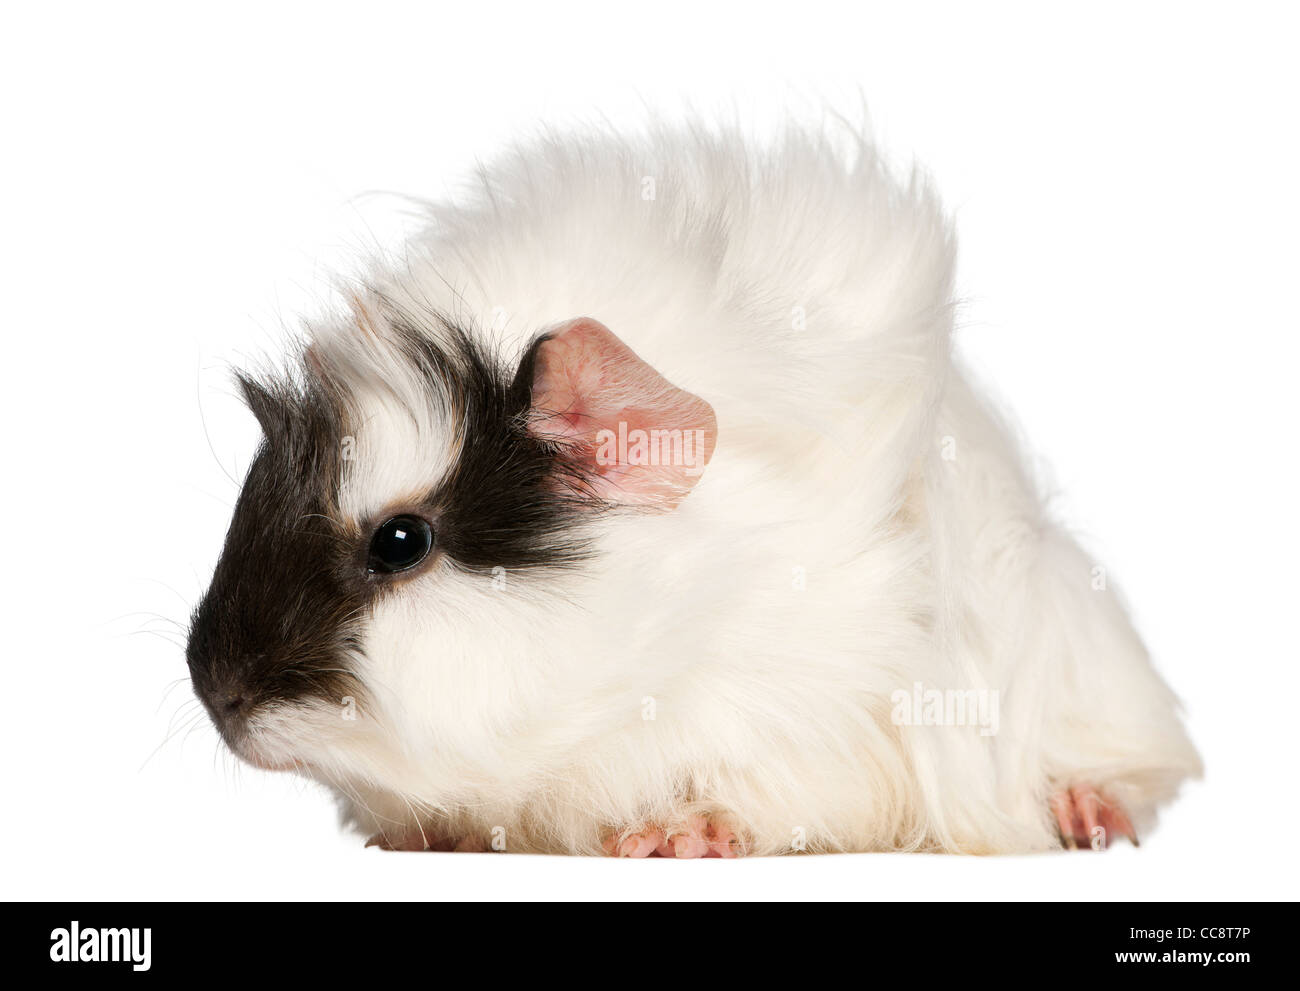 Abyssinian Guinea pig, Cavia porcellus, sitting in front of white background Stock Photo